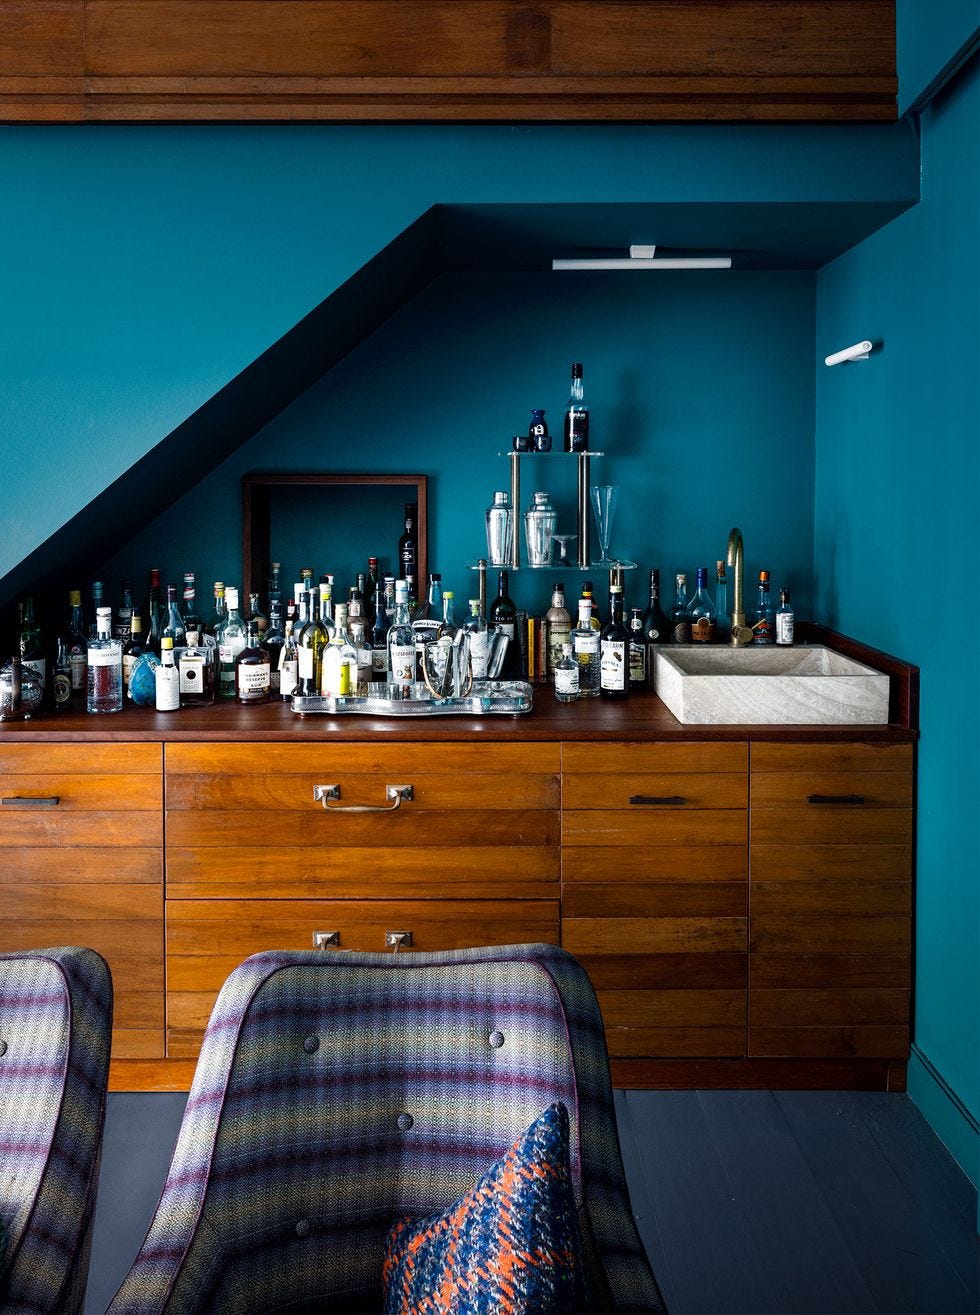 15 Bar Shelf Ideas to Get the Party Started